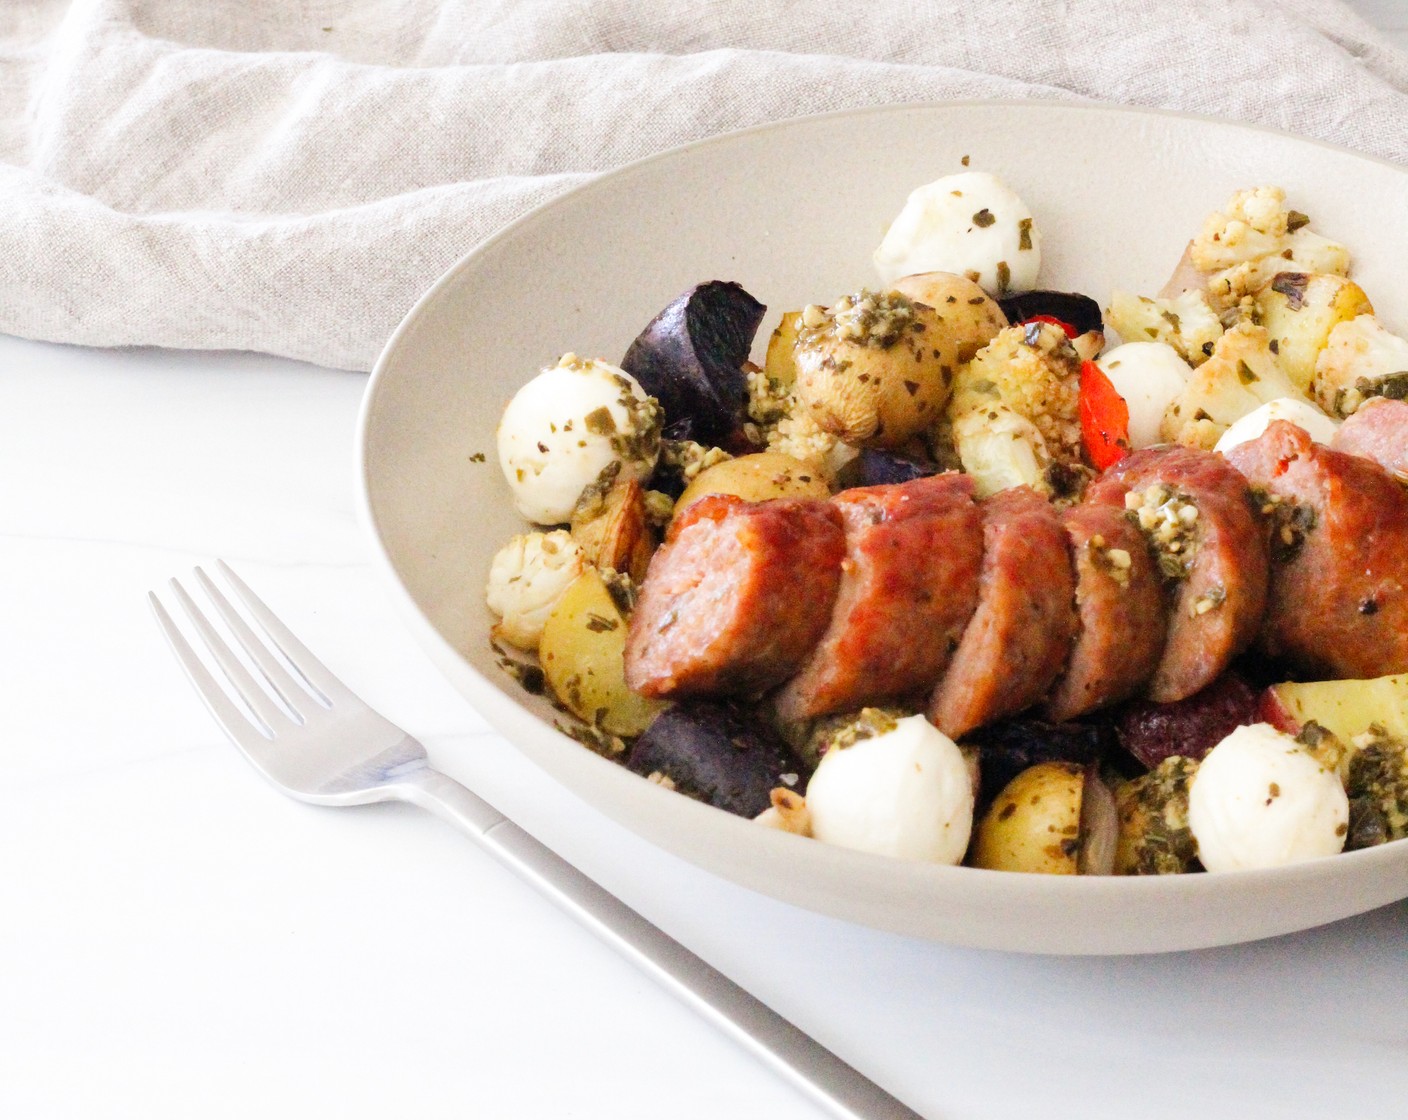 step 8 Plate the dish by spooning roasted veggies into a bowl and adding Fresh Mozzarella Pearls (1/2 cup). Stir gently to combine and top with sliced sausage. Spoon a little more pesto on top and enjoy.